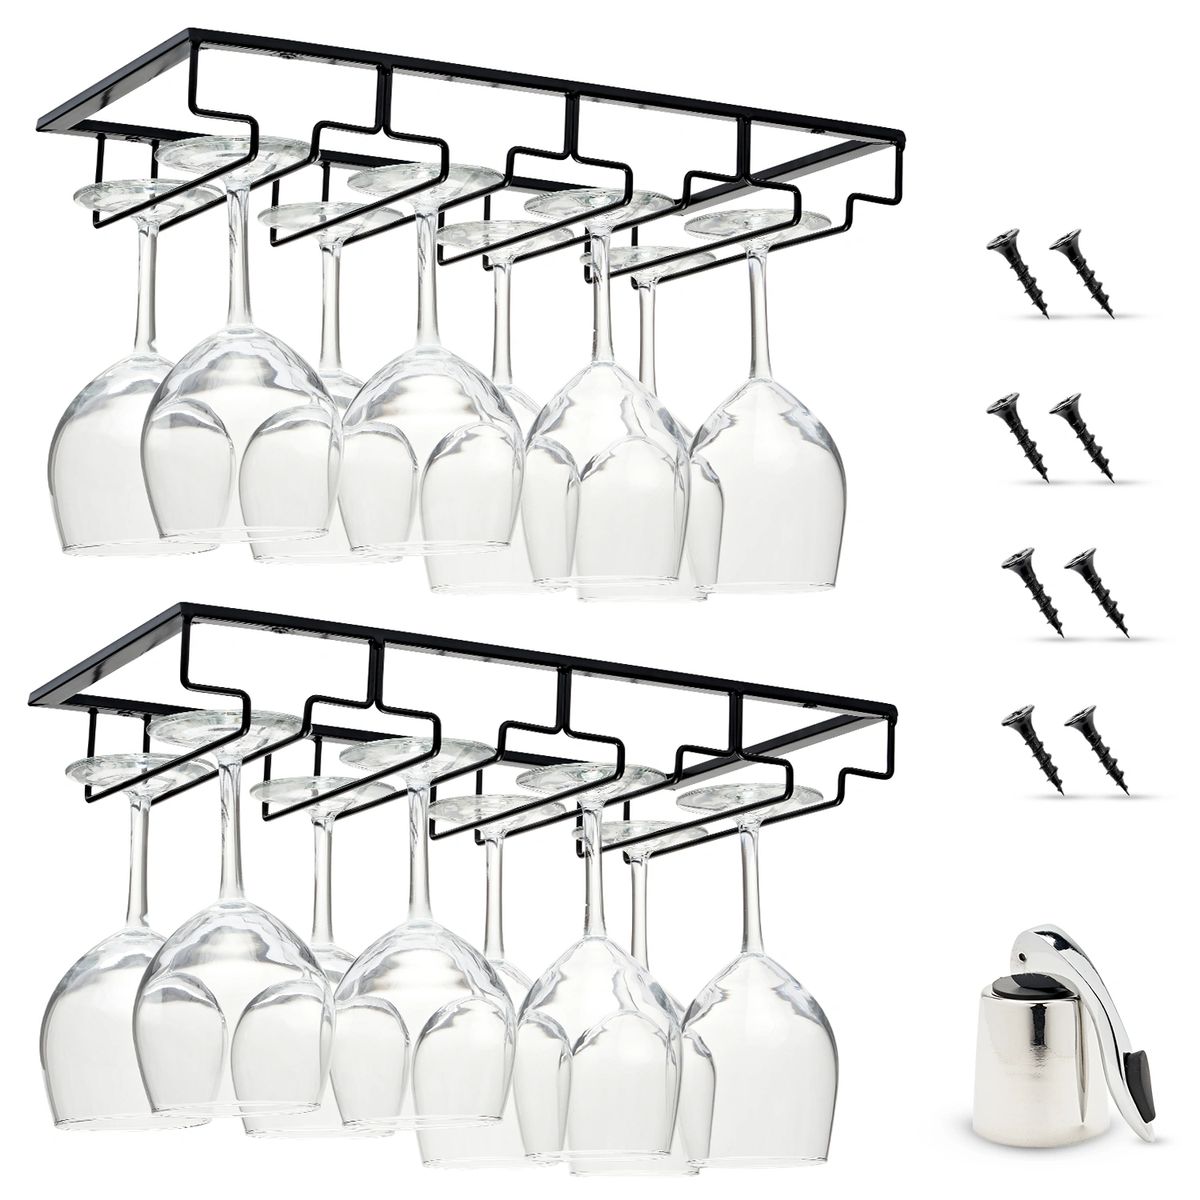 https://img1.wsimg.com/isteam/ip/d7f90306-c70d-49f5-a5b9-d3be6ebd850a/ols/Wine%20Rack%20Black%202pk%20Wine%20Stopper%20WestWindHome_.png/:/rs=w:1200,h:1200